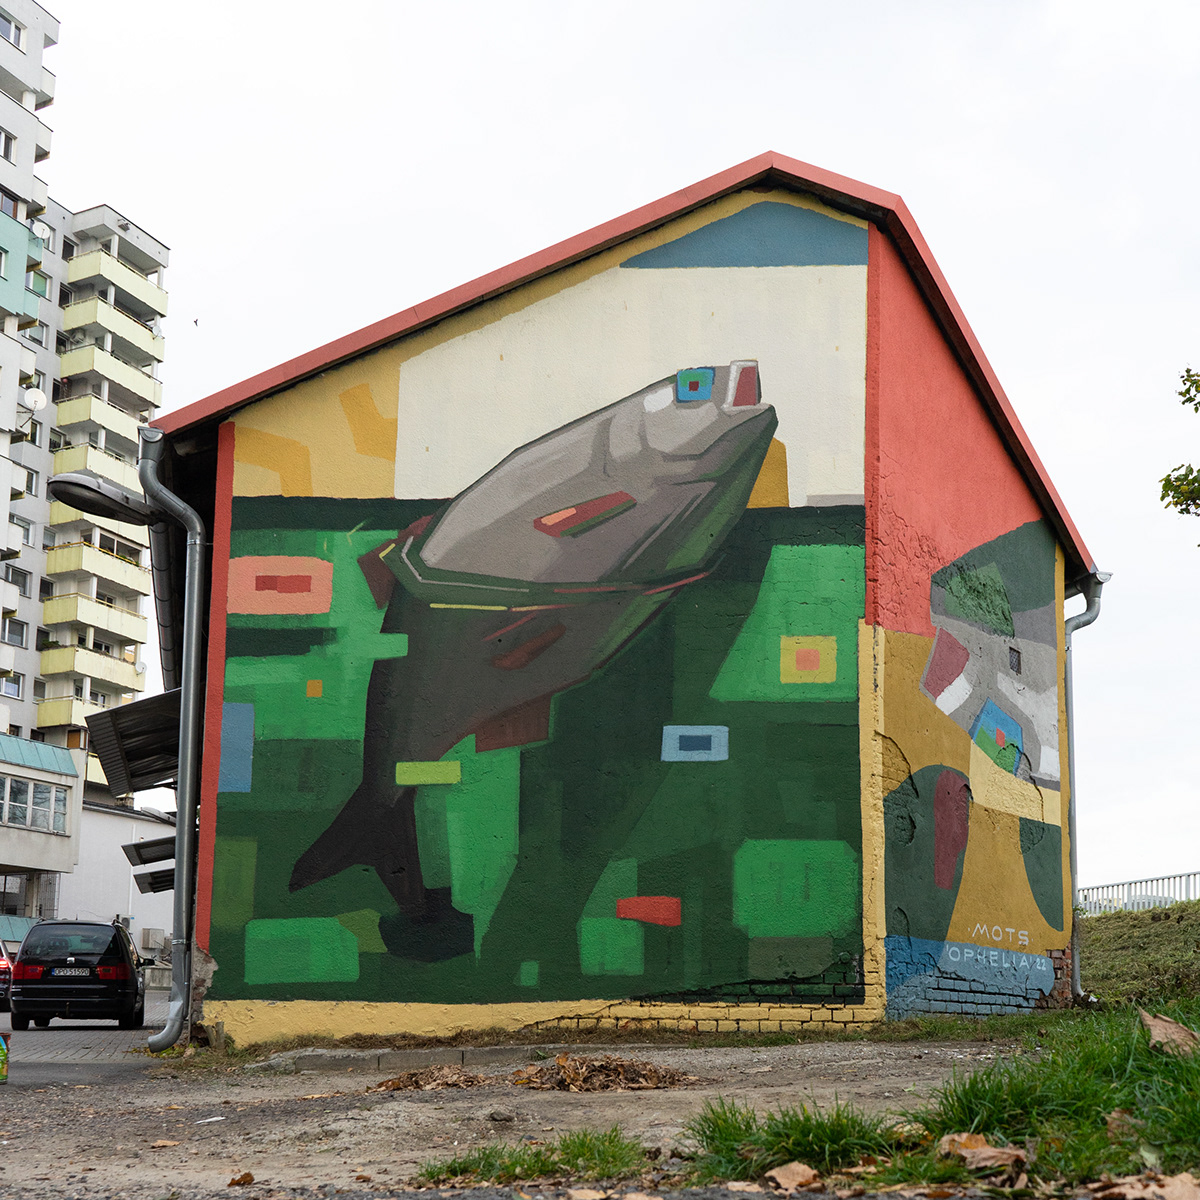 Mural painted in Opole, Poland by MOTS / www.mots.pt